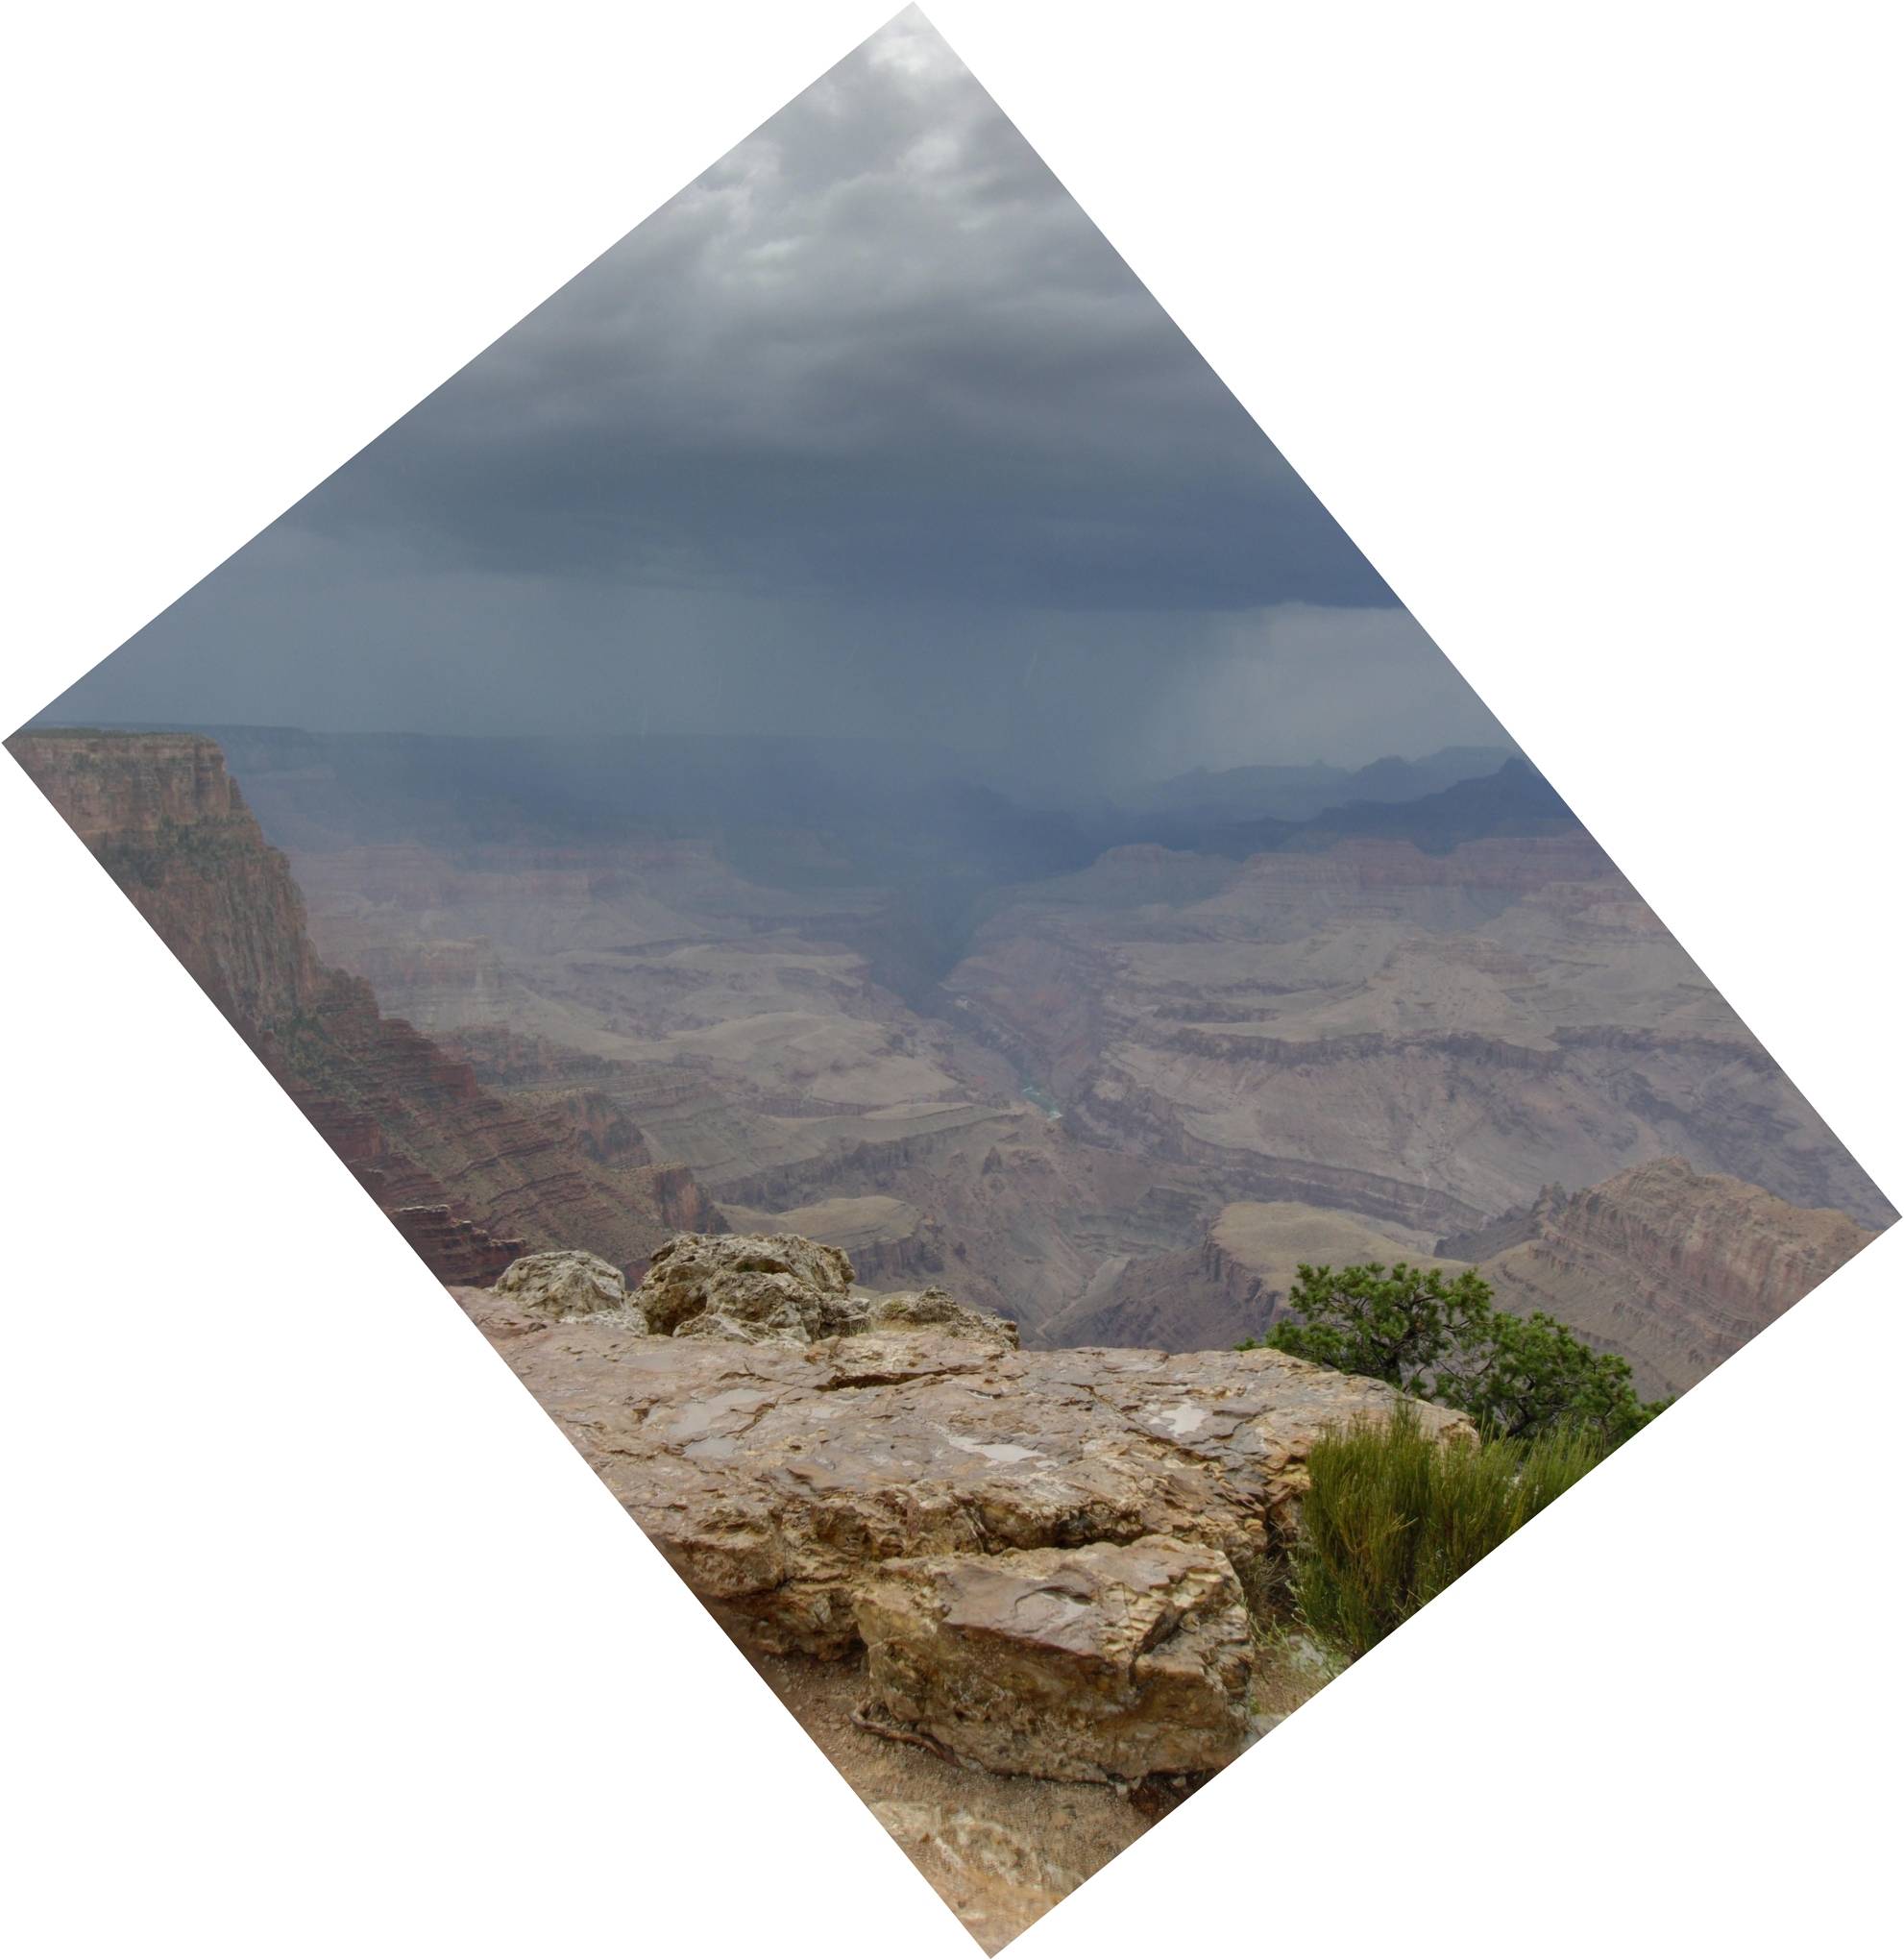 Image: A rainstorm at the northern rim of the Grand Canyon